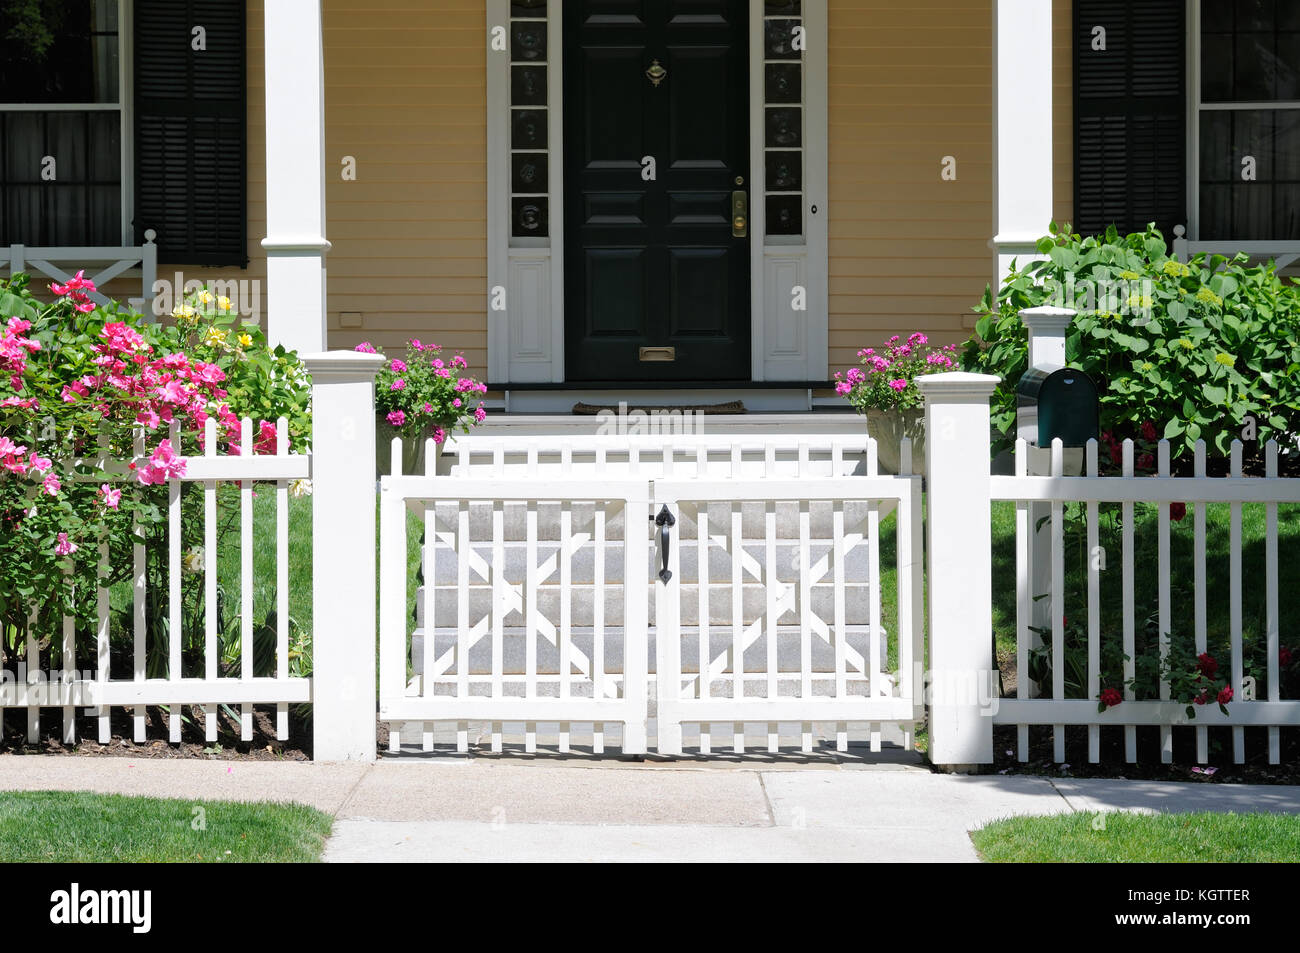 White gate and picket fence with climbing roses, frontal view, Porch steps and house facade in background Stock Photo